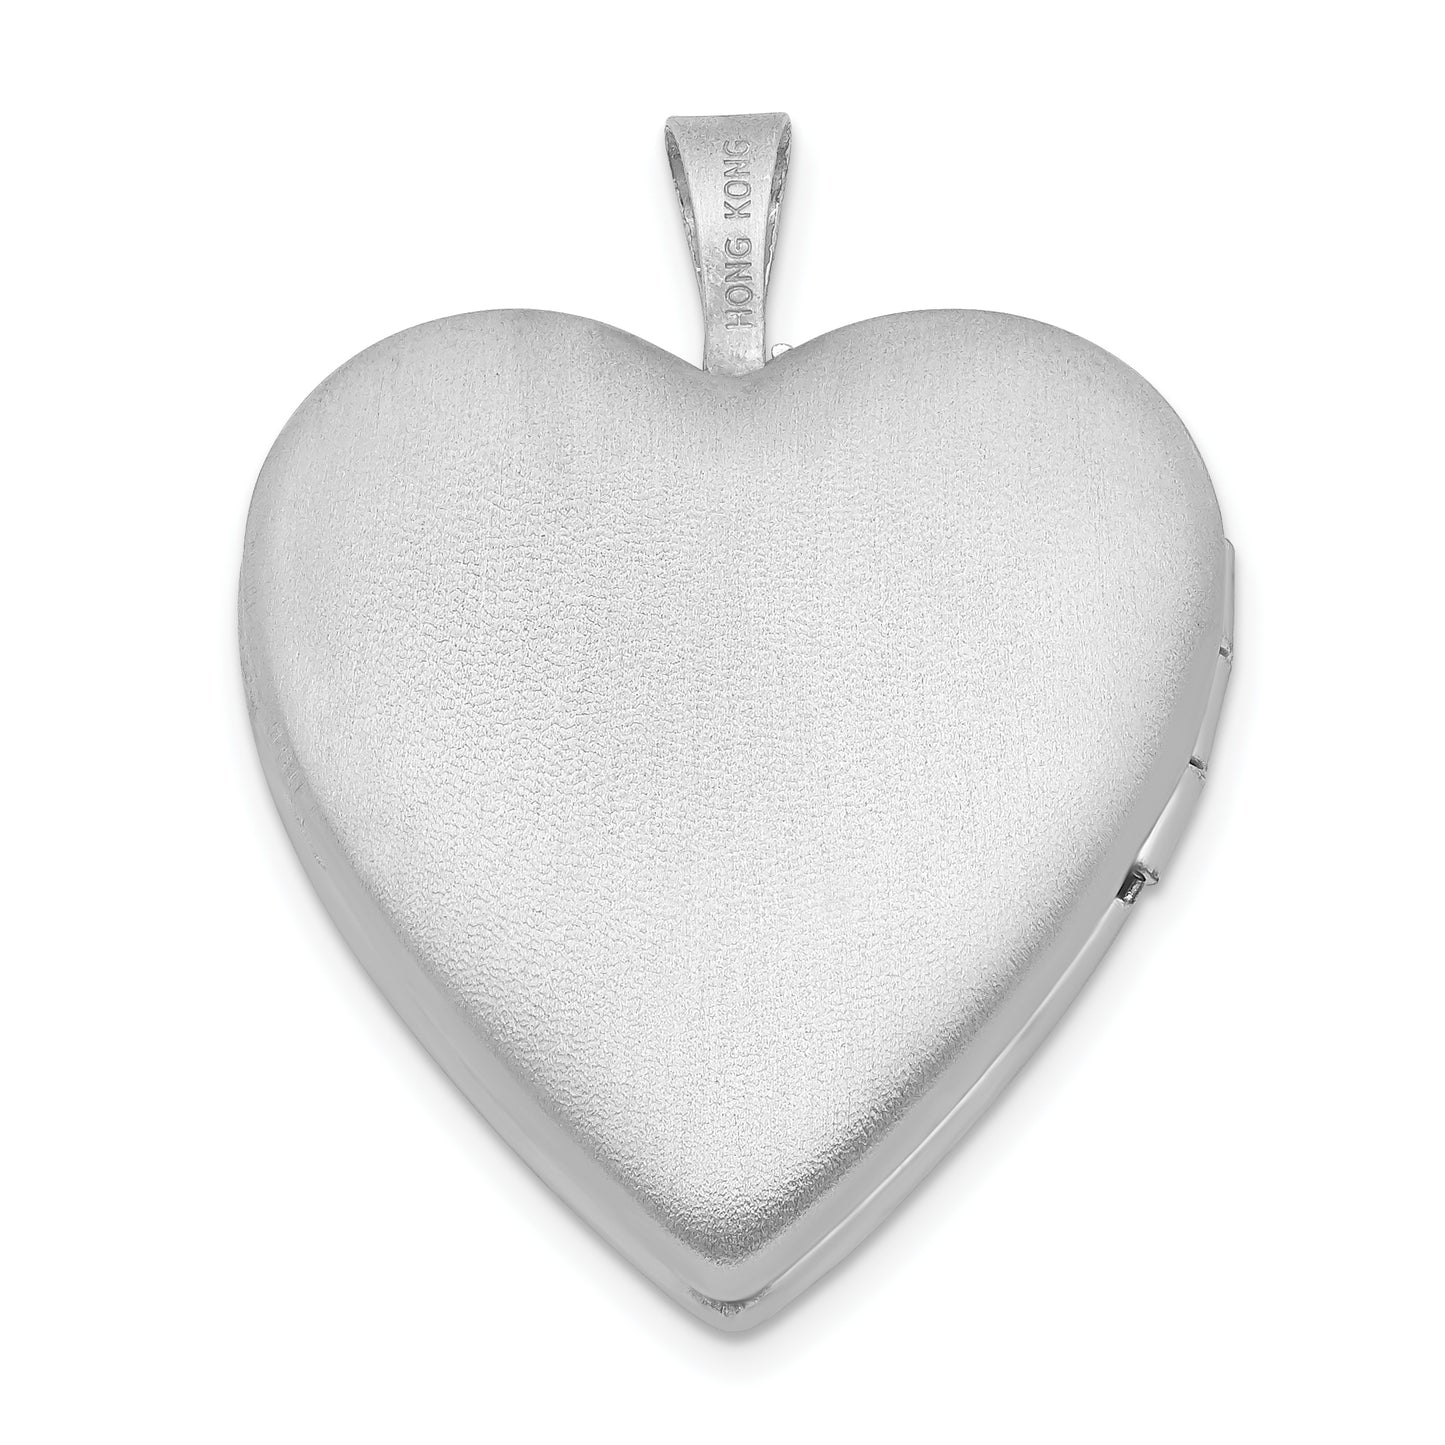 Sterling Silver 20mm Gold-Tone Satin and Polished D/C Claddagh Heart Locket